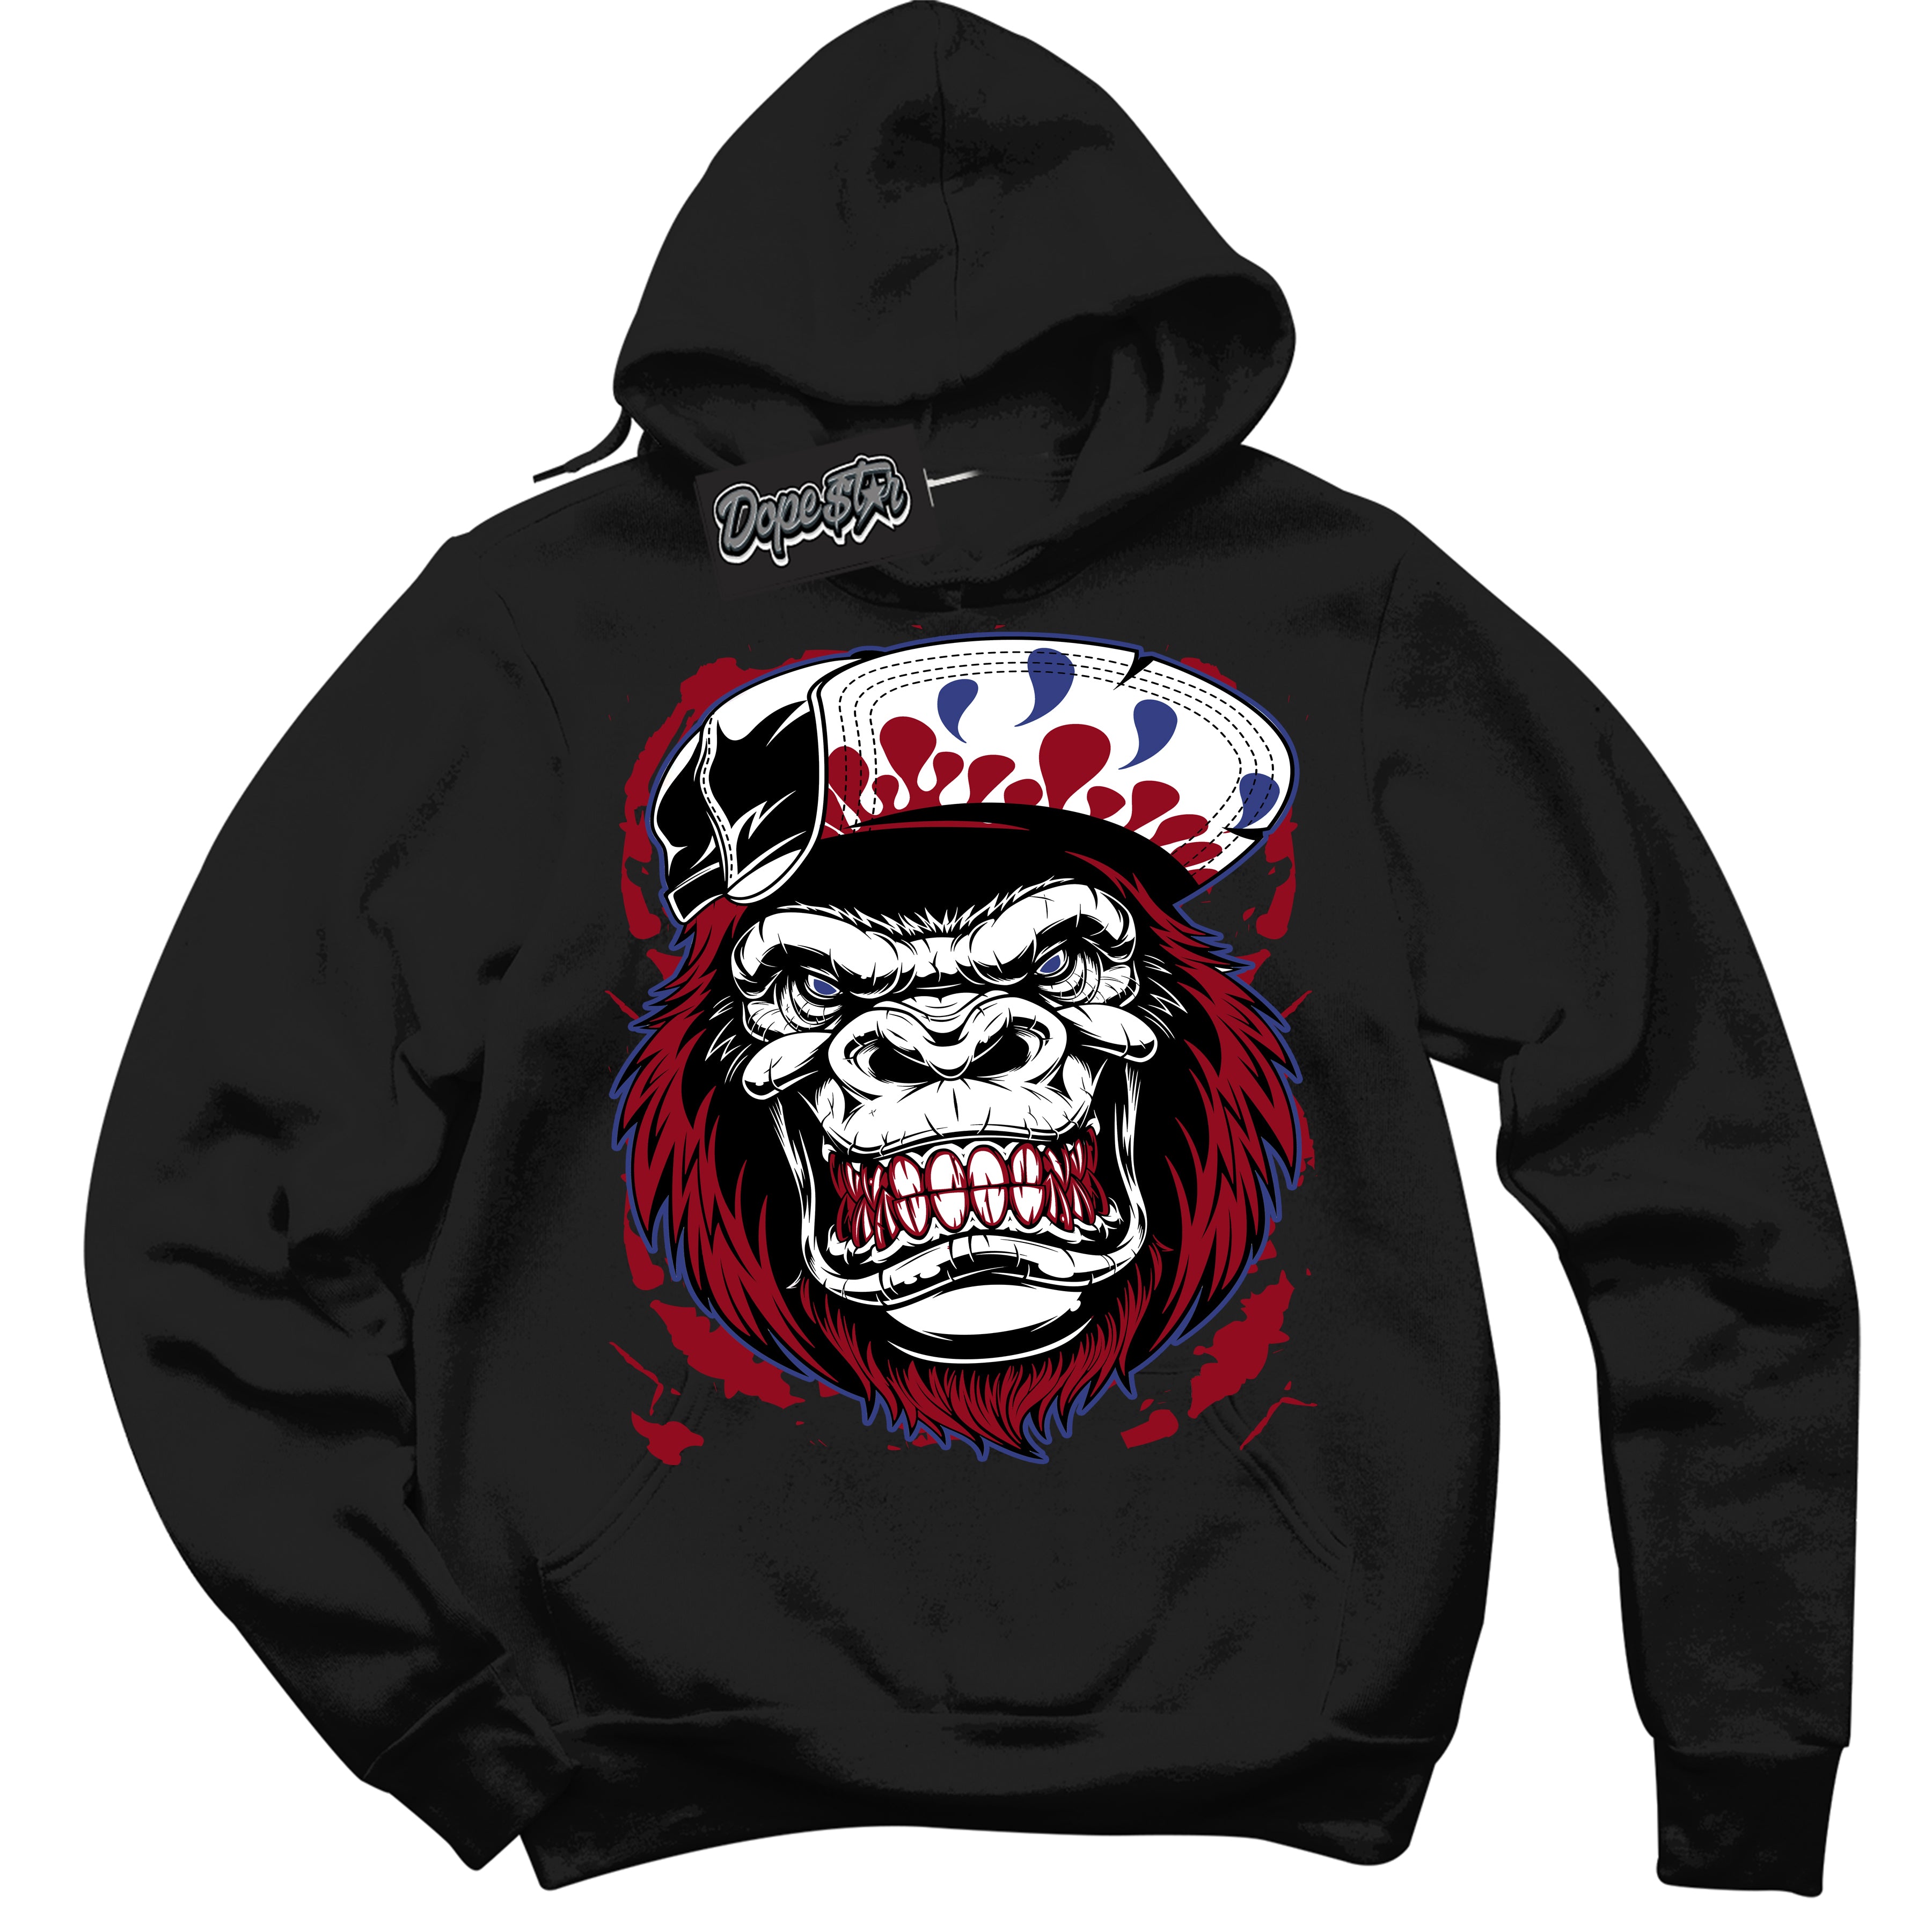 Cool Black Hoodie with “ Gorilla Beast ”  design that Perfectly Matches Playoffs 8s Sneakers.